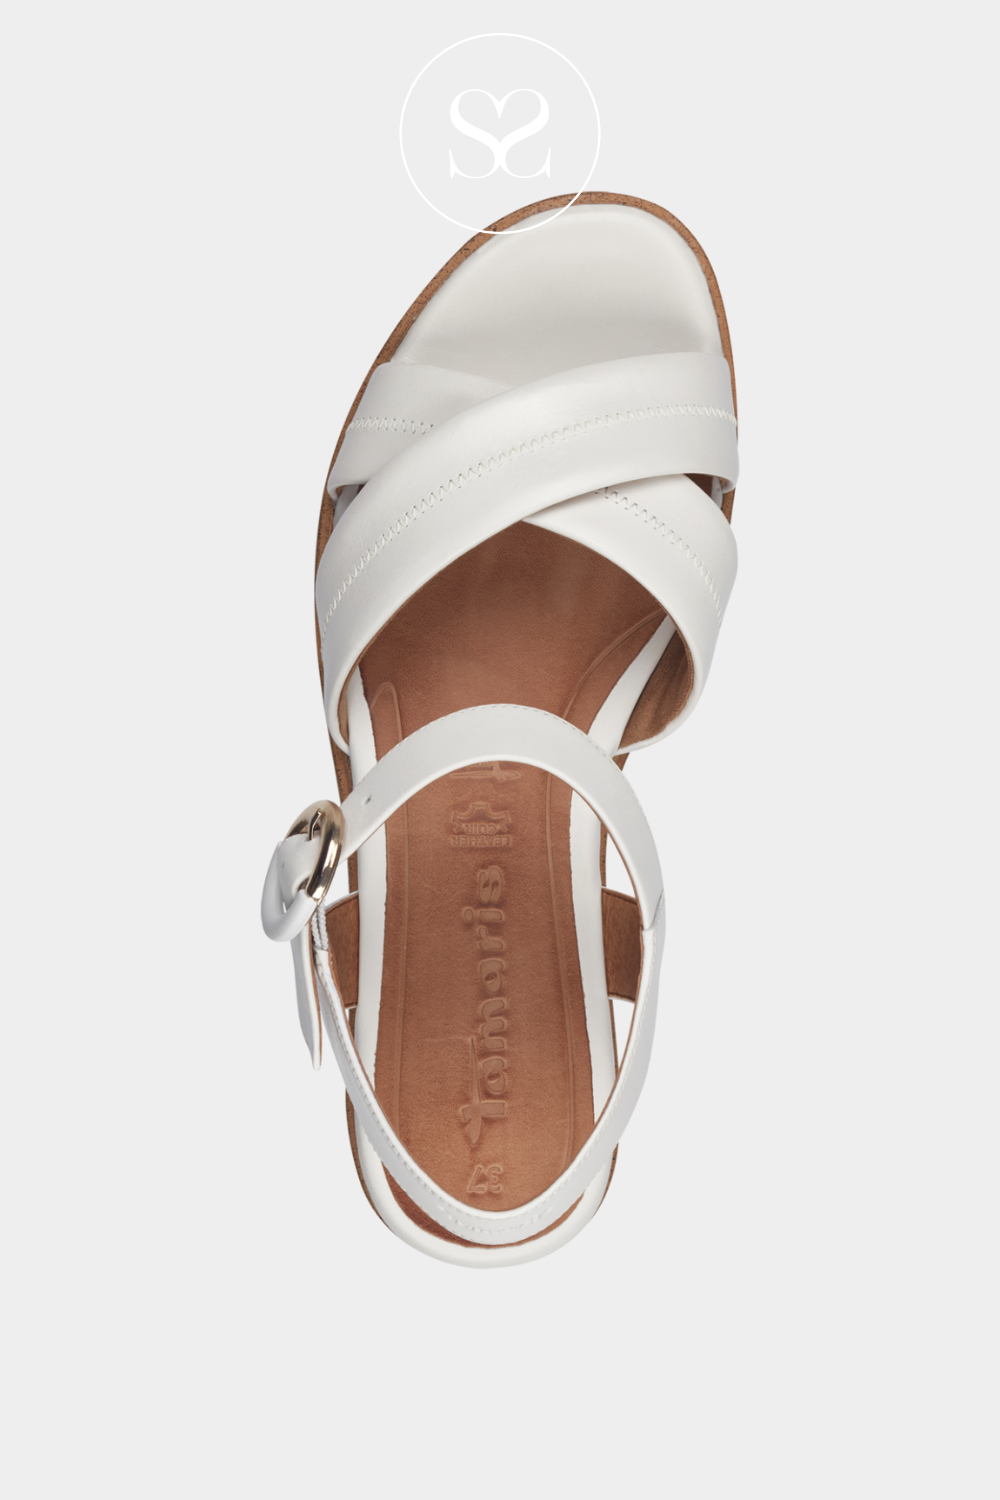 TAMARIS 1-28202-42 WHITE LEATHER WEDGE SANDAL WITH CRISS CROSS STRAPS AND ADJUSTABLE ANKLE STRAP